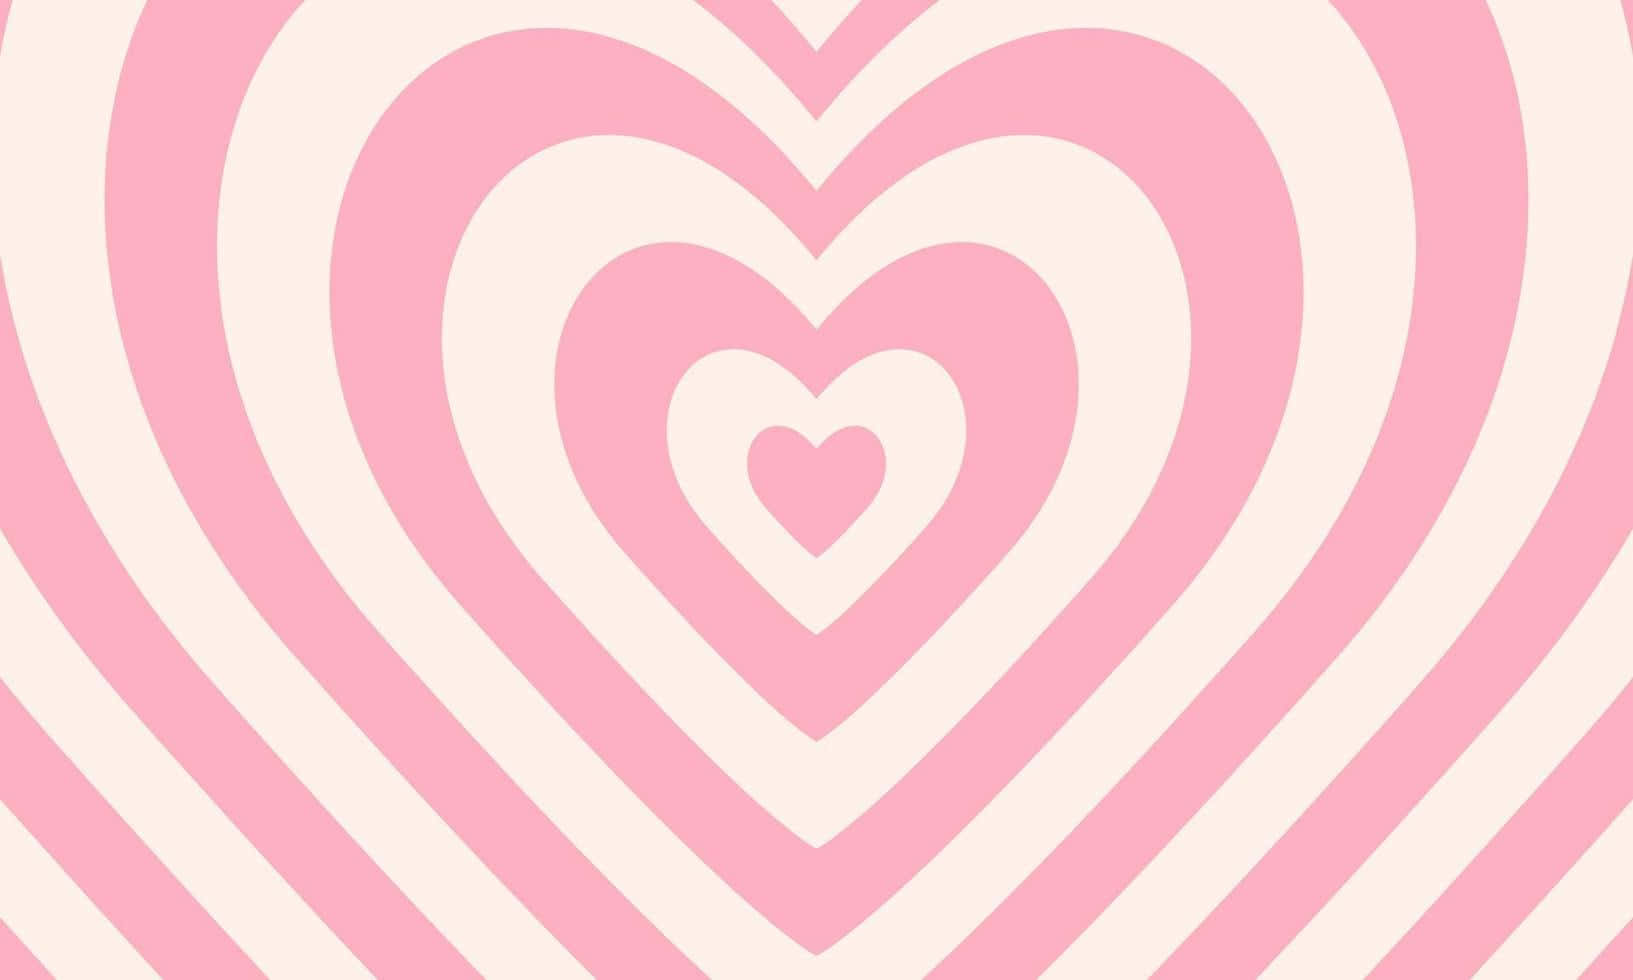 A Pink And White Striped Background With Hearts